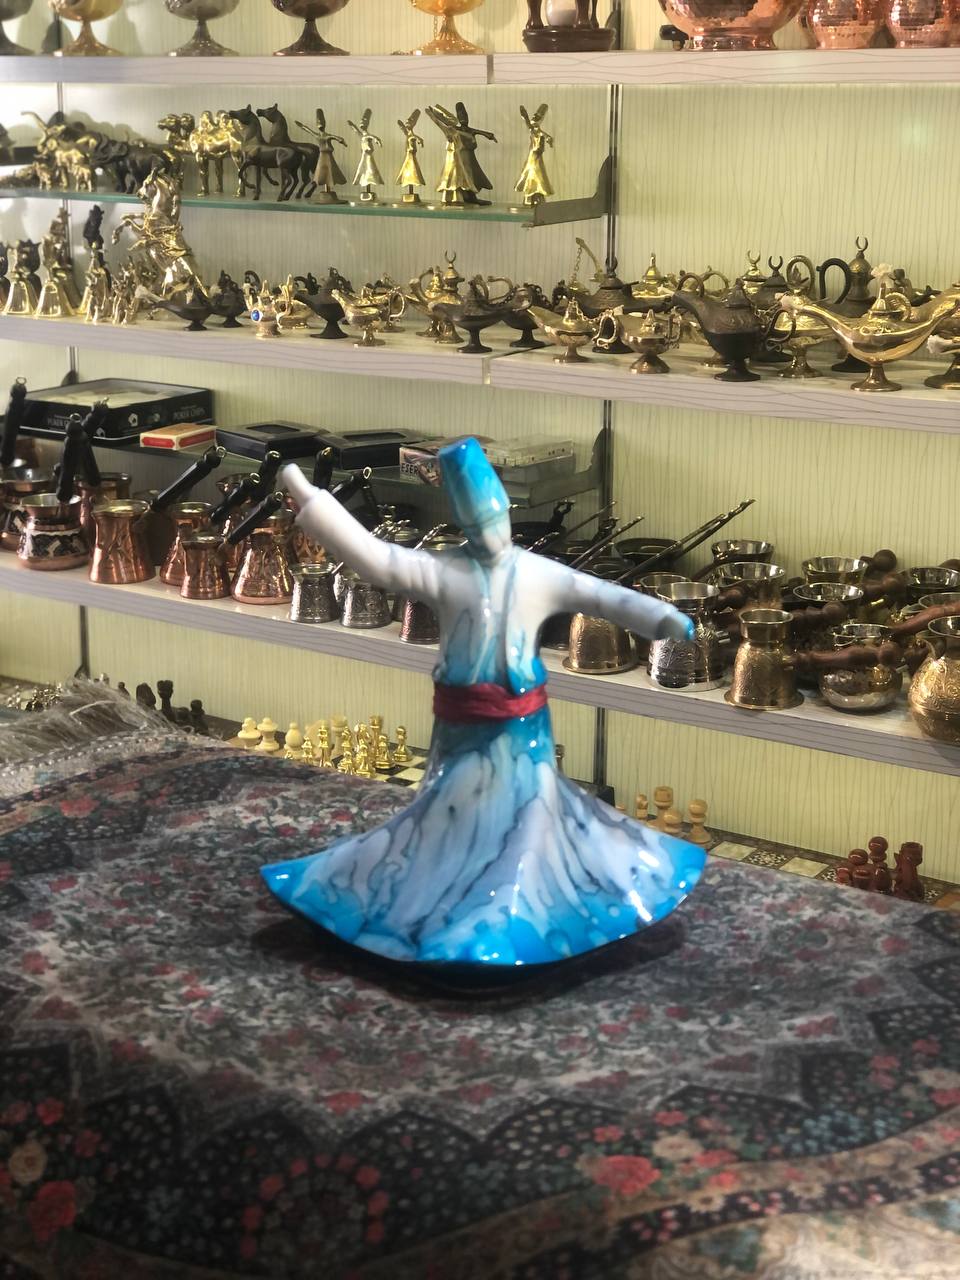 Decorative Turkish Handmade and Colorful, Islamic Gift Whirling Dervish, Mevlana Figure, Ottoman Decoration-Small Size